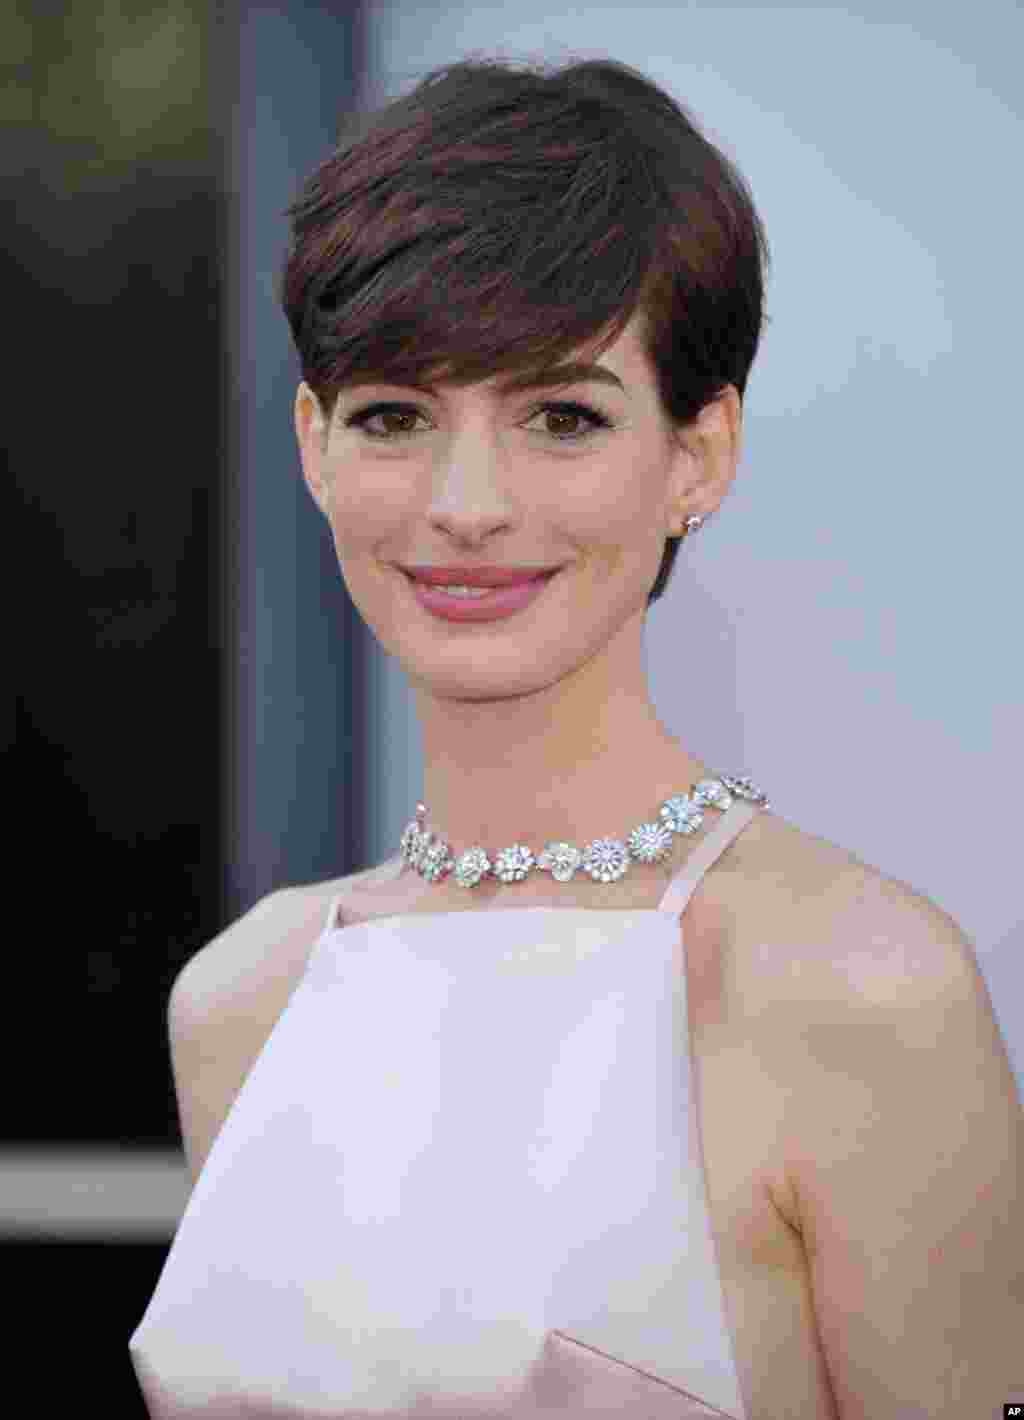 Actress Anne Hathaway arrives at the Oscars at the Dolby Theatre, Feb. 24, 2013, in Los Angeles. 